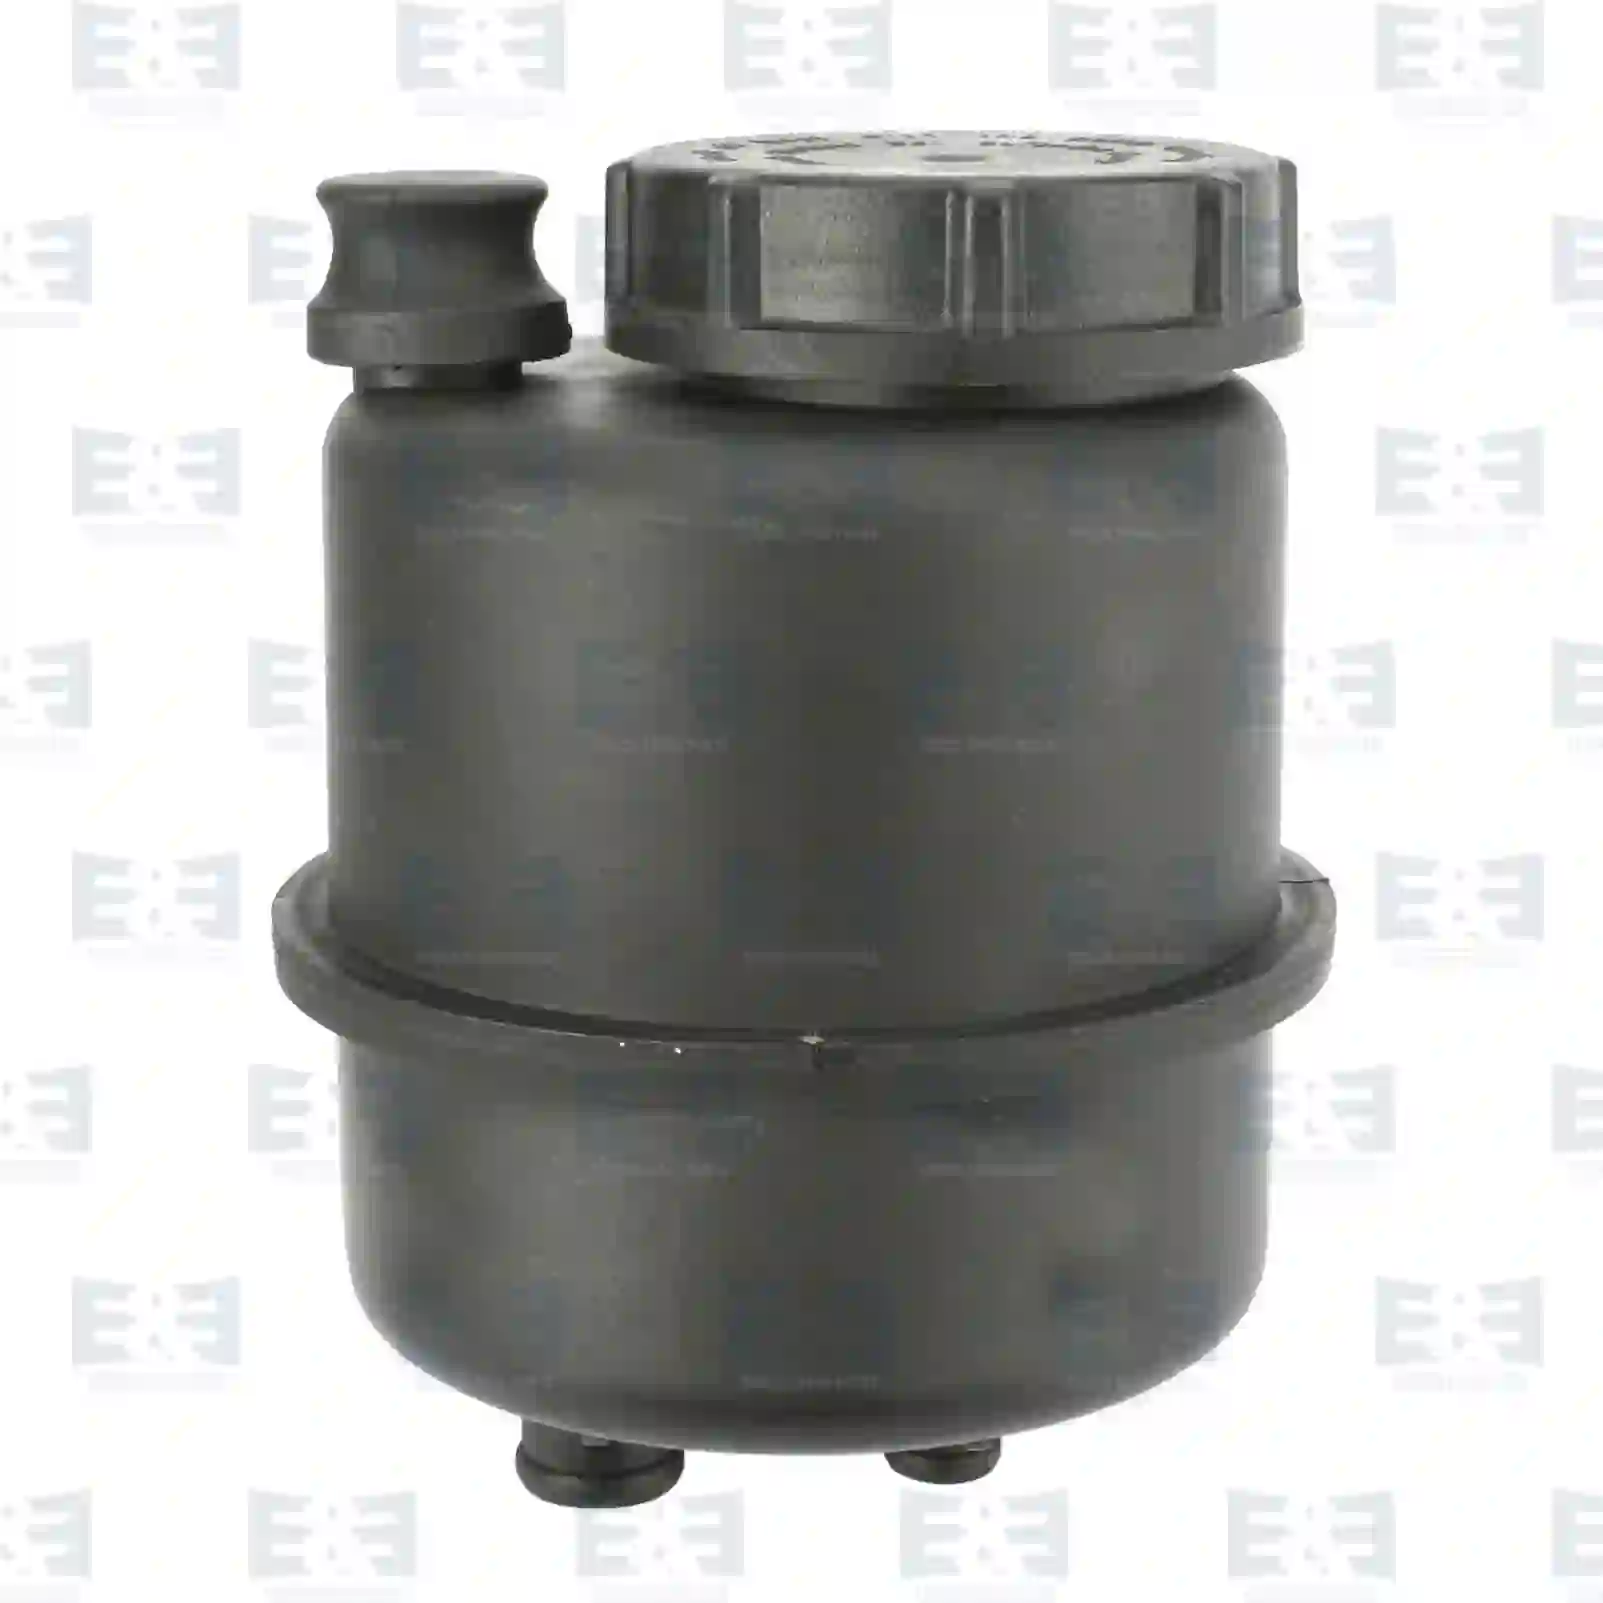 Oil Container, Steering Oil container, with filter, EE No 2E2205885 ,  oem no:0274965, 274965, RAK3233, 655644, 1017435, 3600254000, 42548853, 61585775, 93193415, 93805623, 81473016030, 85400003315, N1011019621, 0004663802, 0004664502, 0004665502, 0004666202, 49180-D8800, RAK3233, 5000791018, 7401592945, 1327382, 297353, 318533, 524094, 40070, 1794020171, 1794120900, J1794020171, 281473016030, 20210531, 274965, 1592945, ZG03042-0008 E&E Truck Spare Parts | Truck Spare Parts, Auotomotive Spare Parts